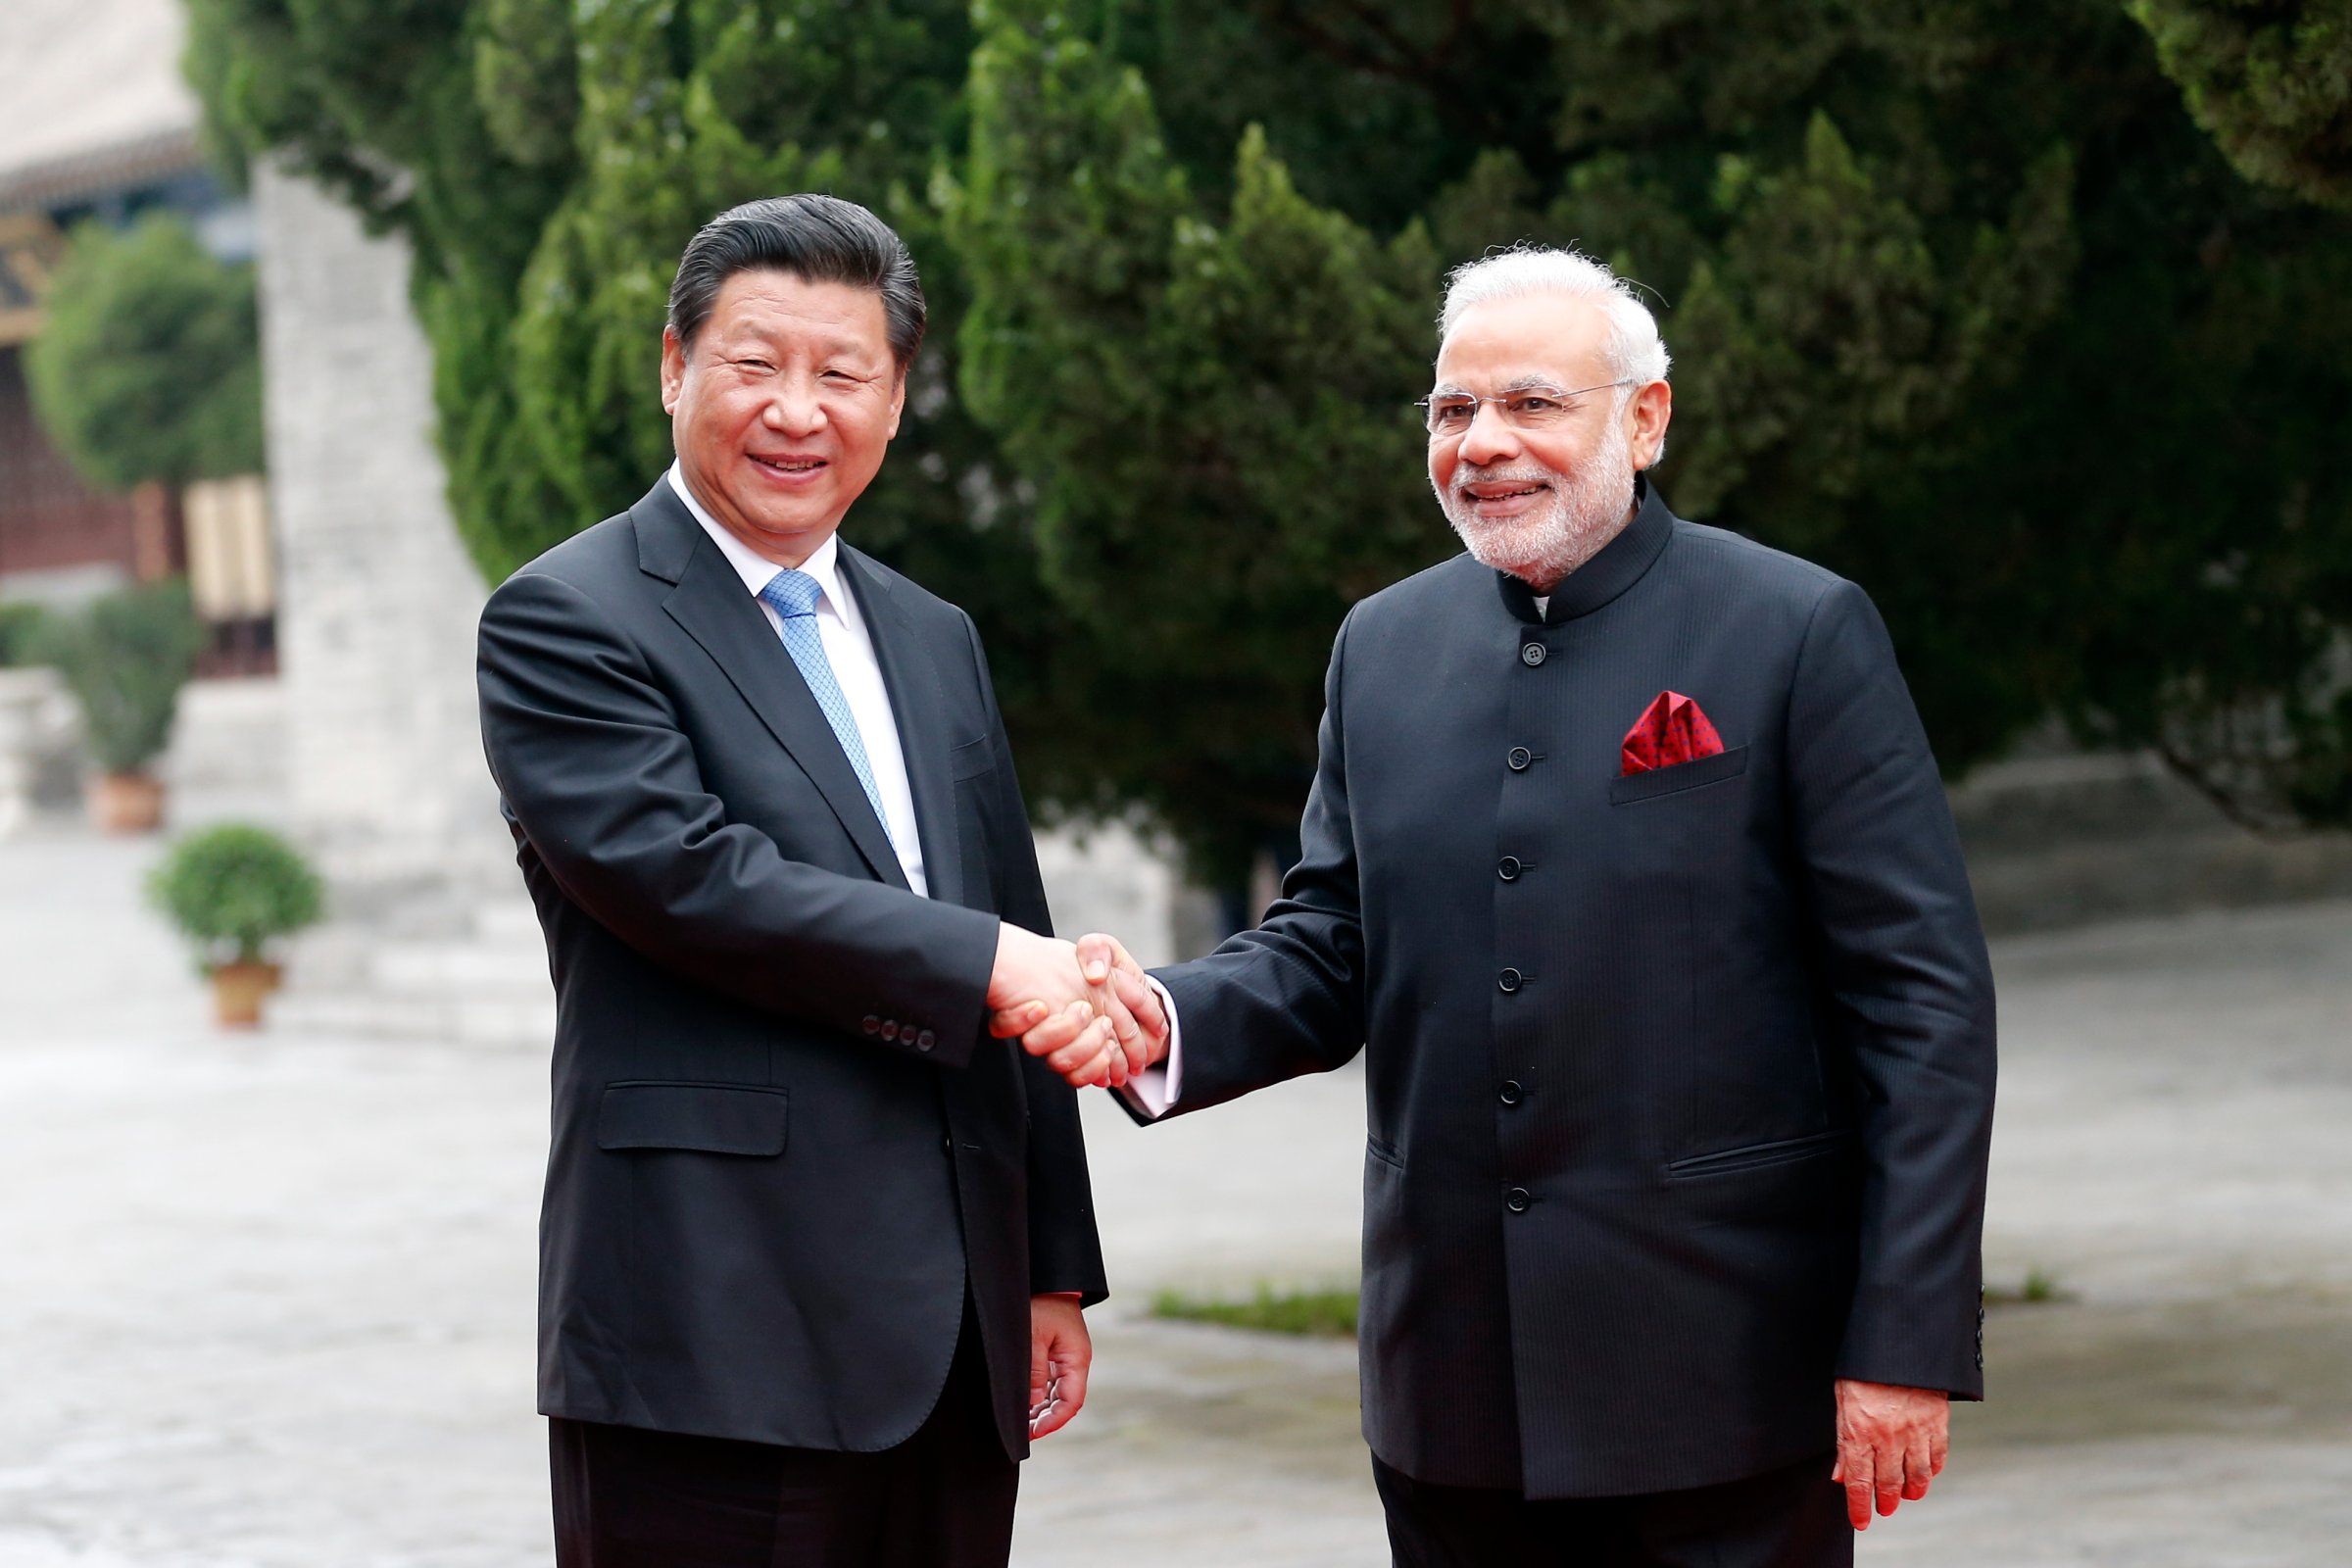 Chinese President Xi Jinping (L) and Indian Prime Minister Narendra Modi during their visit to Daci'en Temple in Xi'an, China on May 14, 2015.